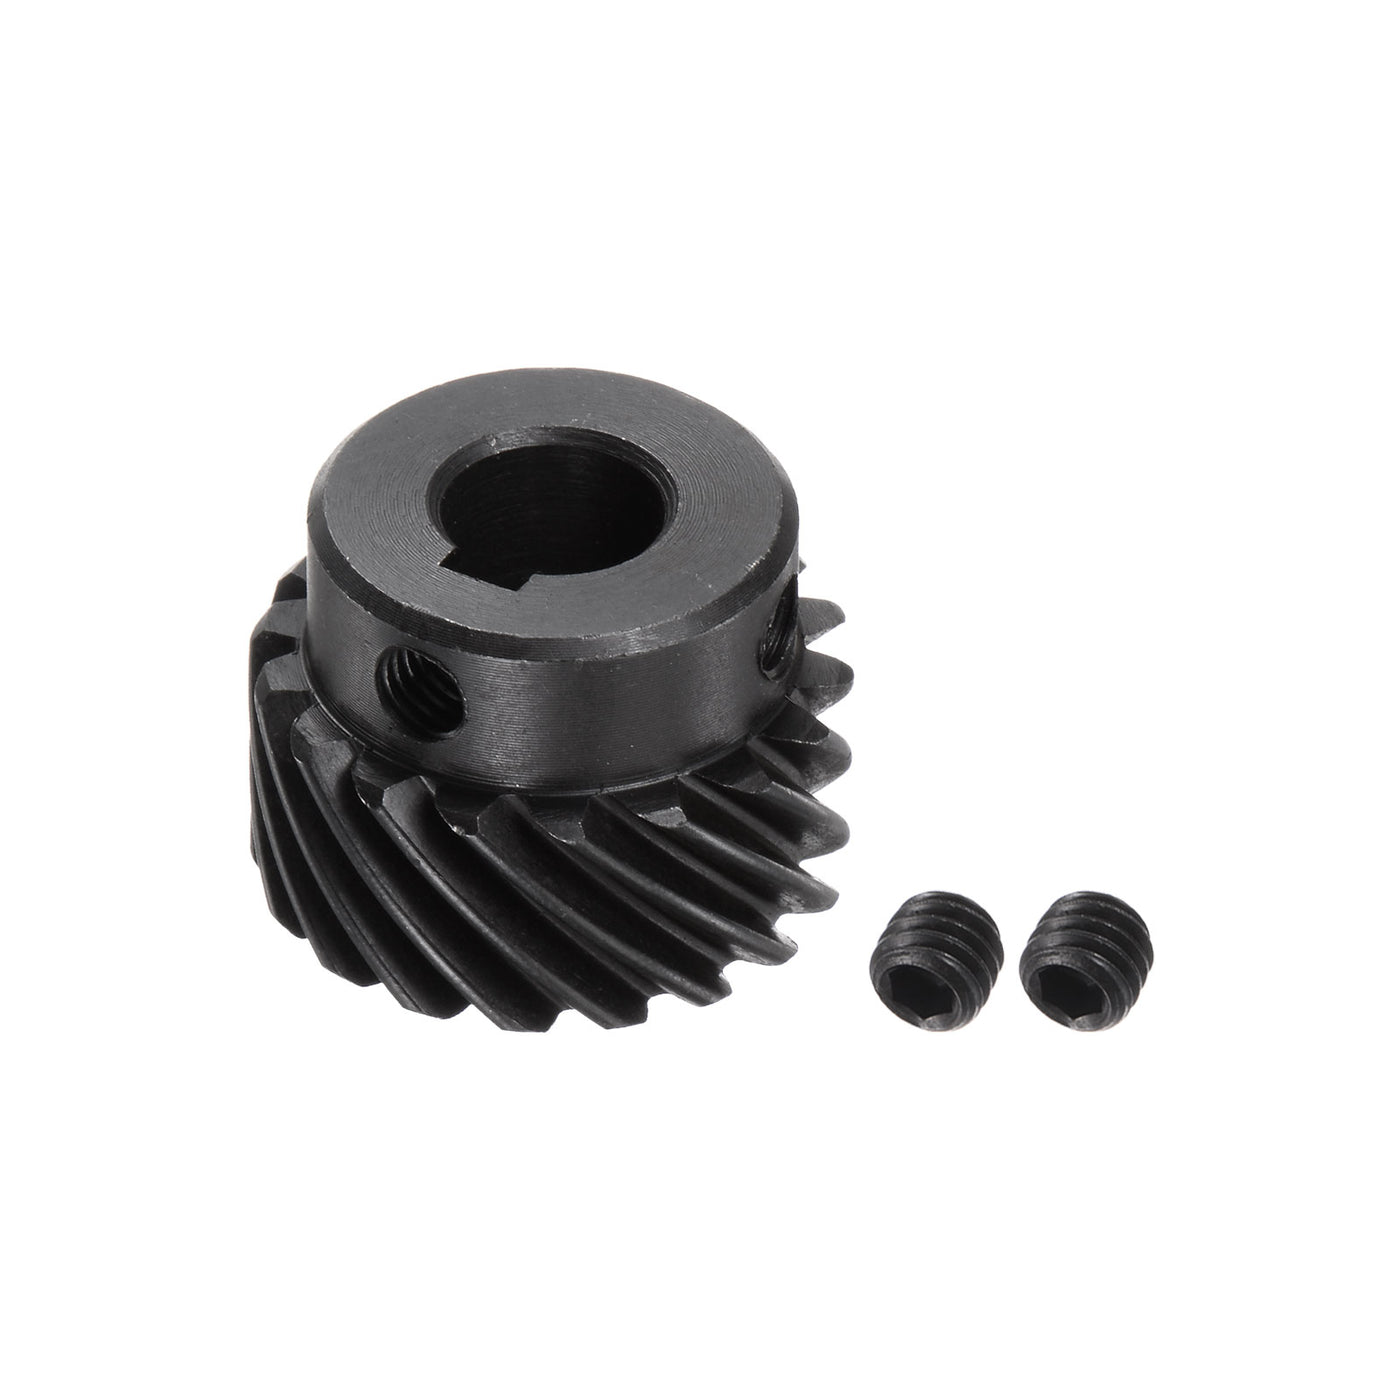 uxcell Uxcell 10mm Aperture 18T Helical Gear 1 Mod 4x1.8mm Keyway Motor Gear, Left Direction